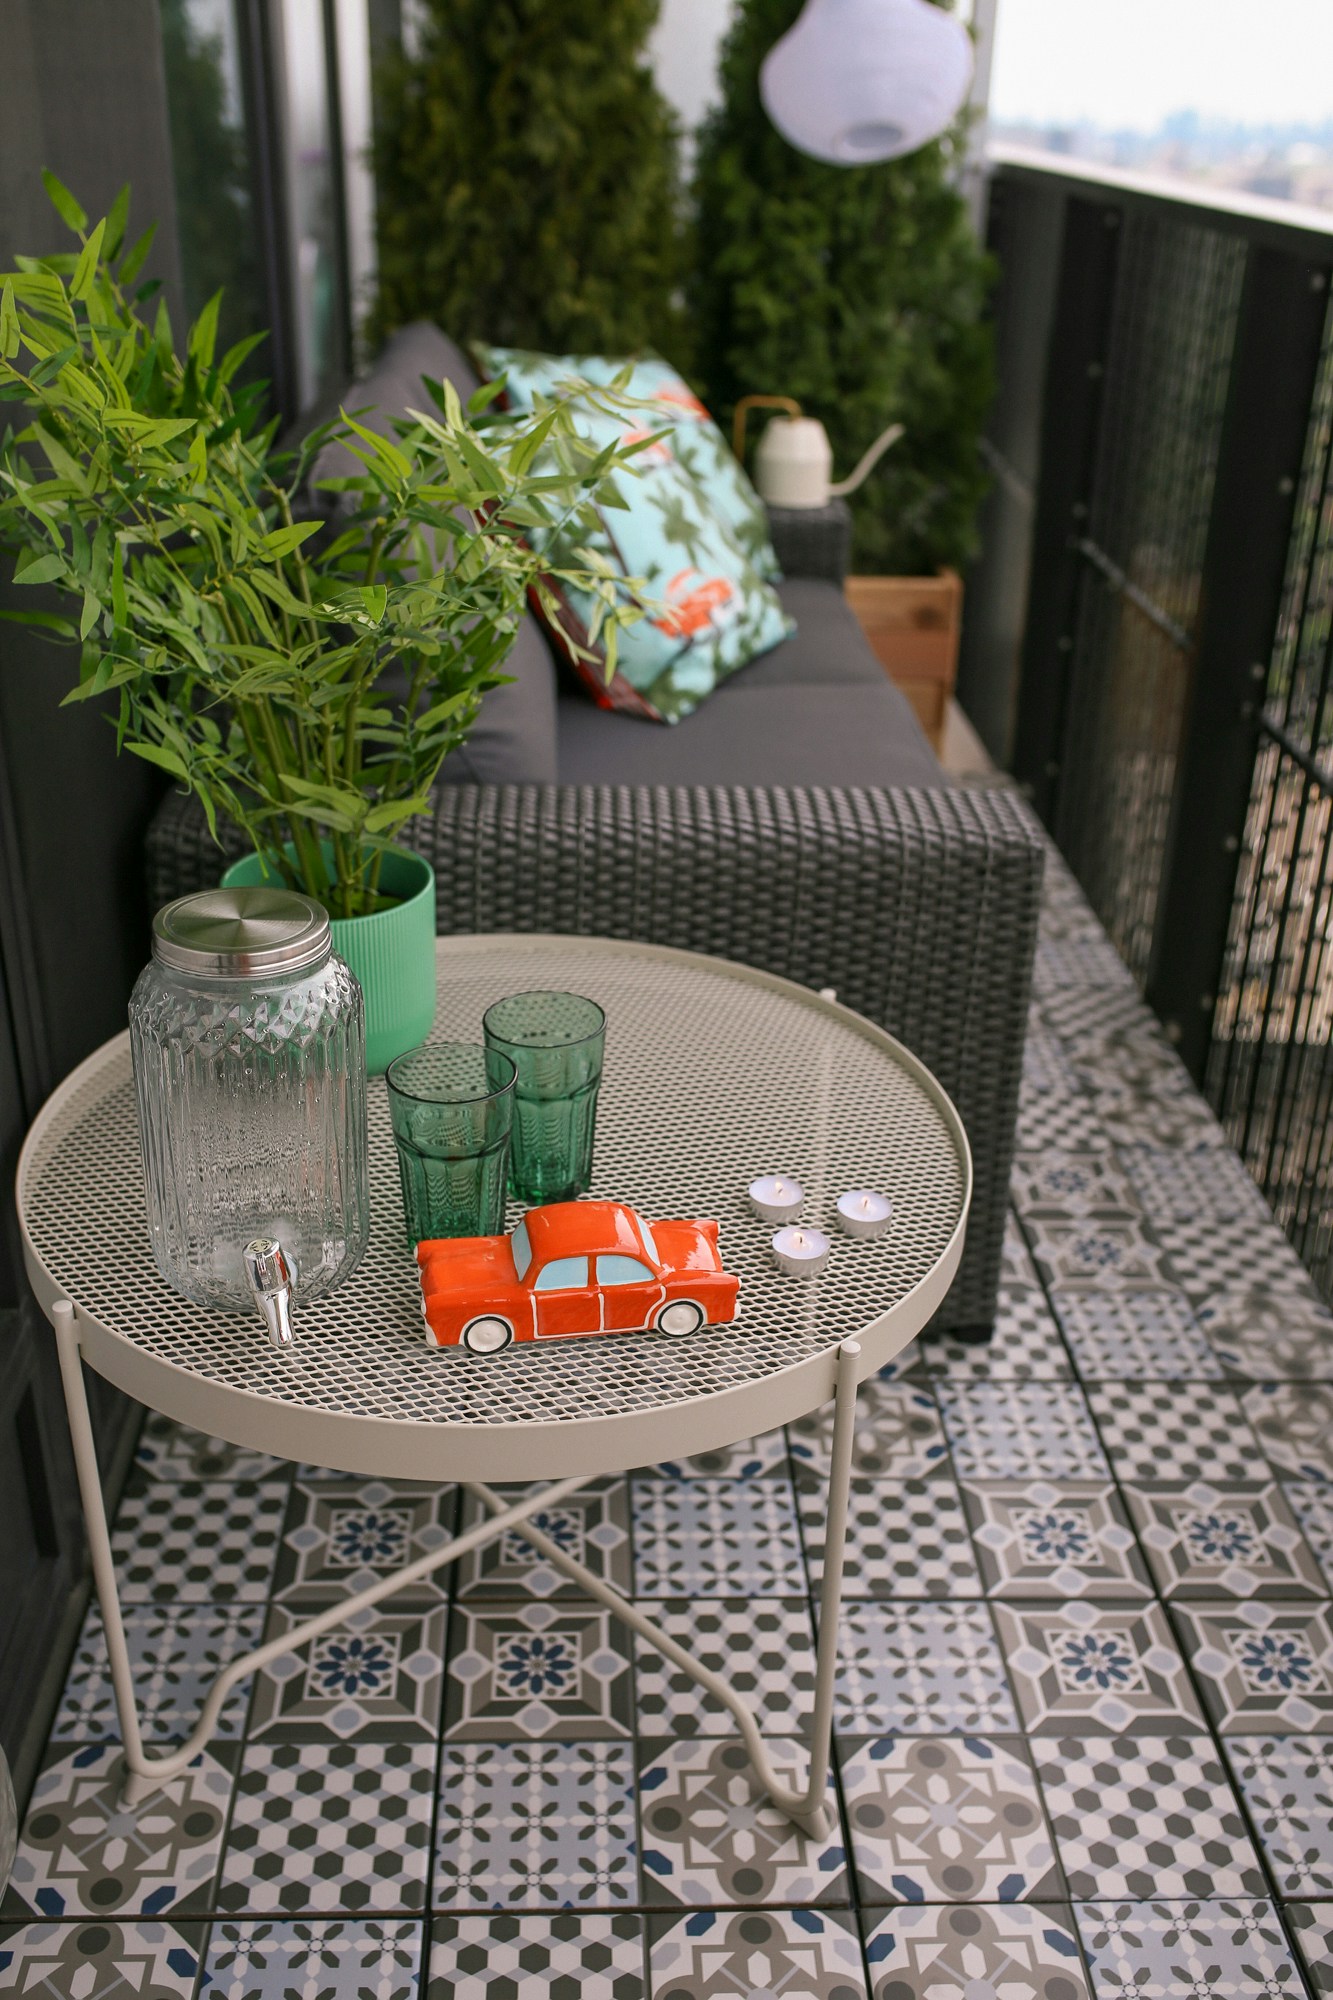 IKEA Patio Furniture Review - the best products for making your balcony a chic outdoor space. The Krokholmen metal coffee table from IKEA is very practical, sturdy and perfect for entertaining.